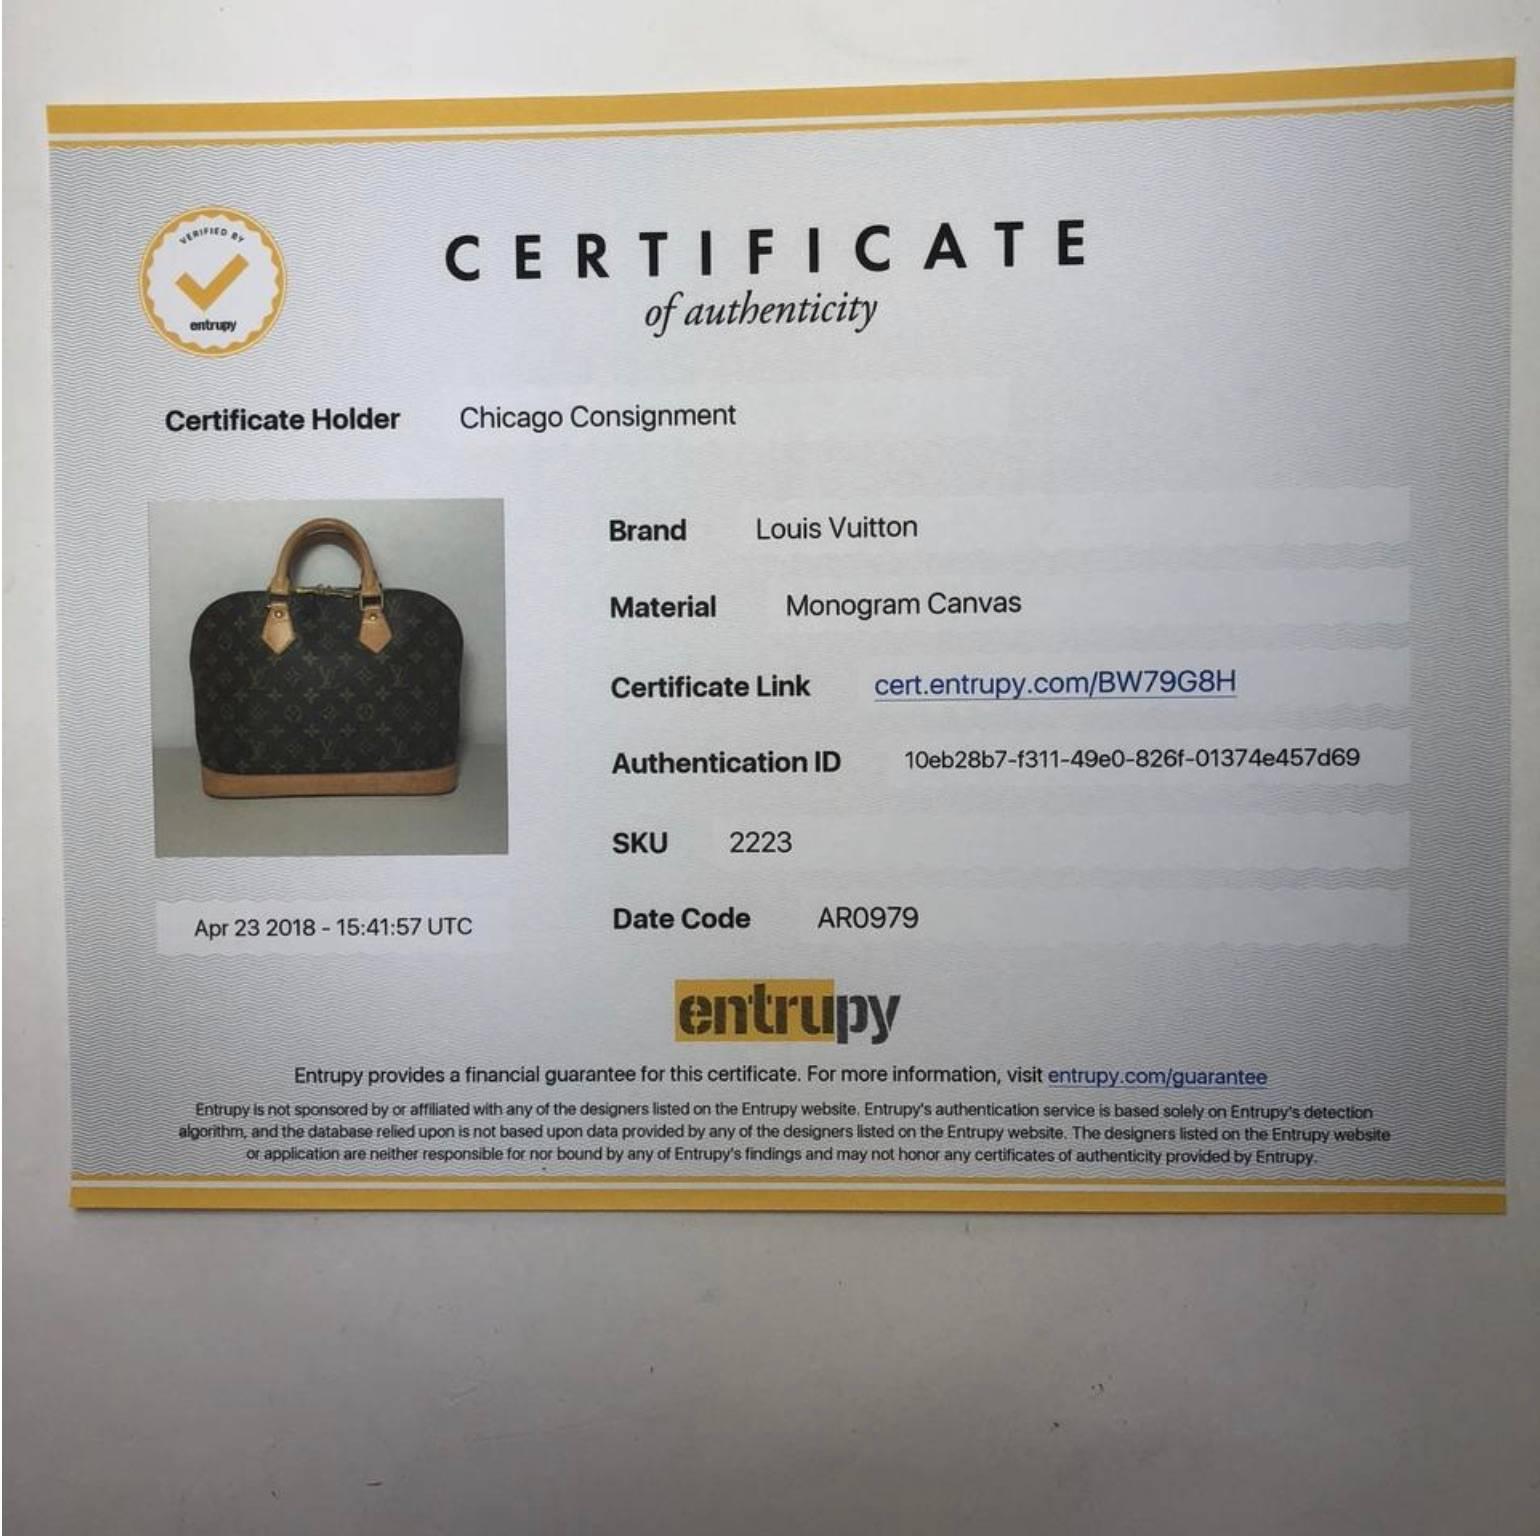 MODEL - Louis Vuitton Monogram Alma PM

CONDITION - Very Good. Clean and light vachette, watermarks on base and lower trim. No rips, holes, tears, stains or odors. Piece maintains original shape without cracks or creases. Bright and shiny hardware.